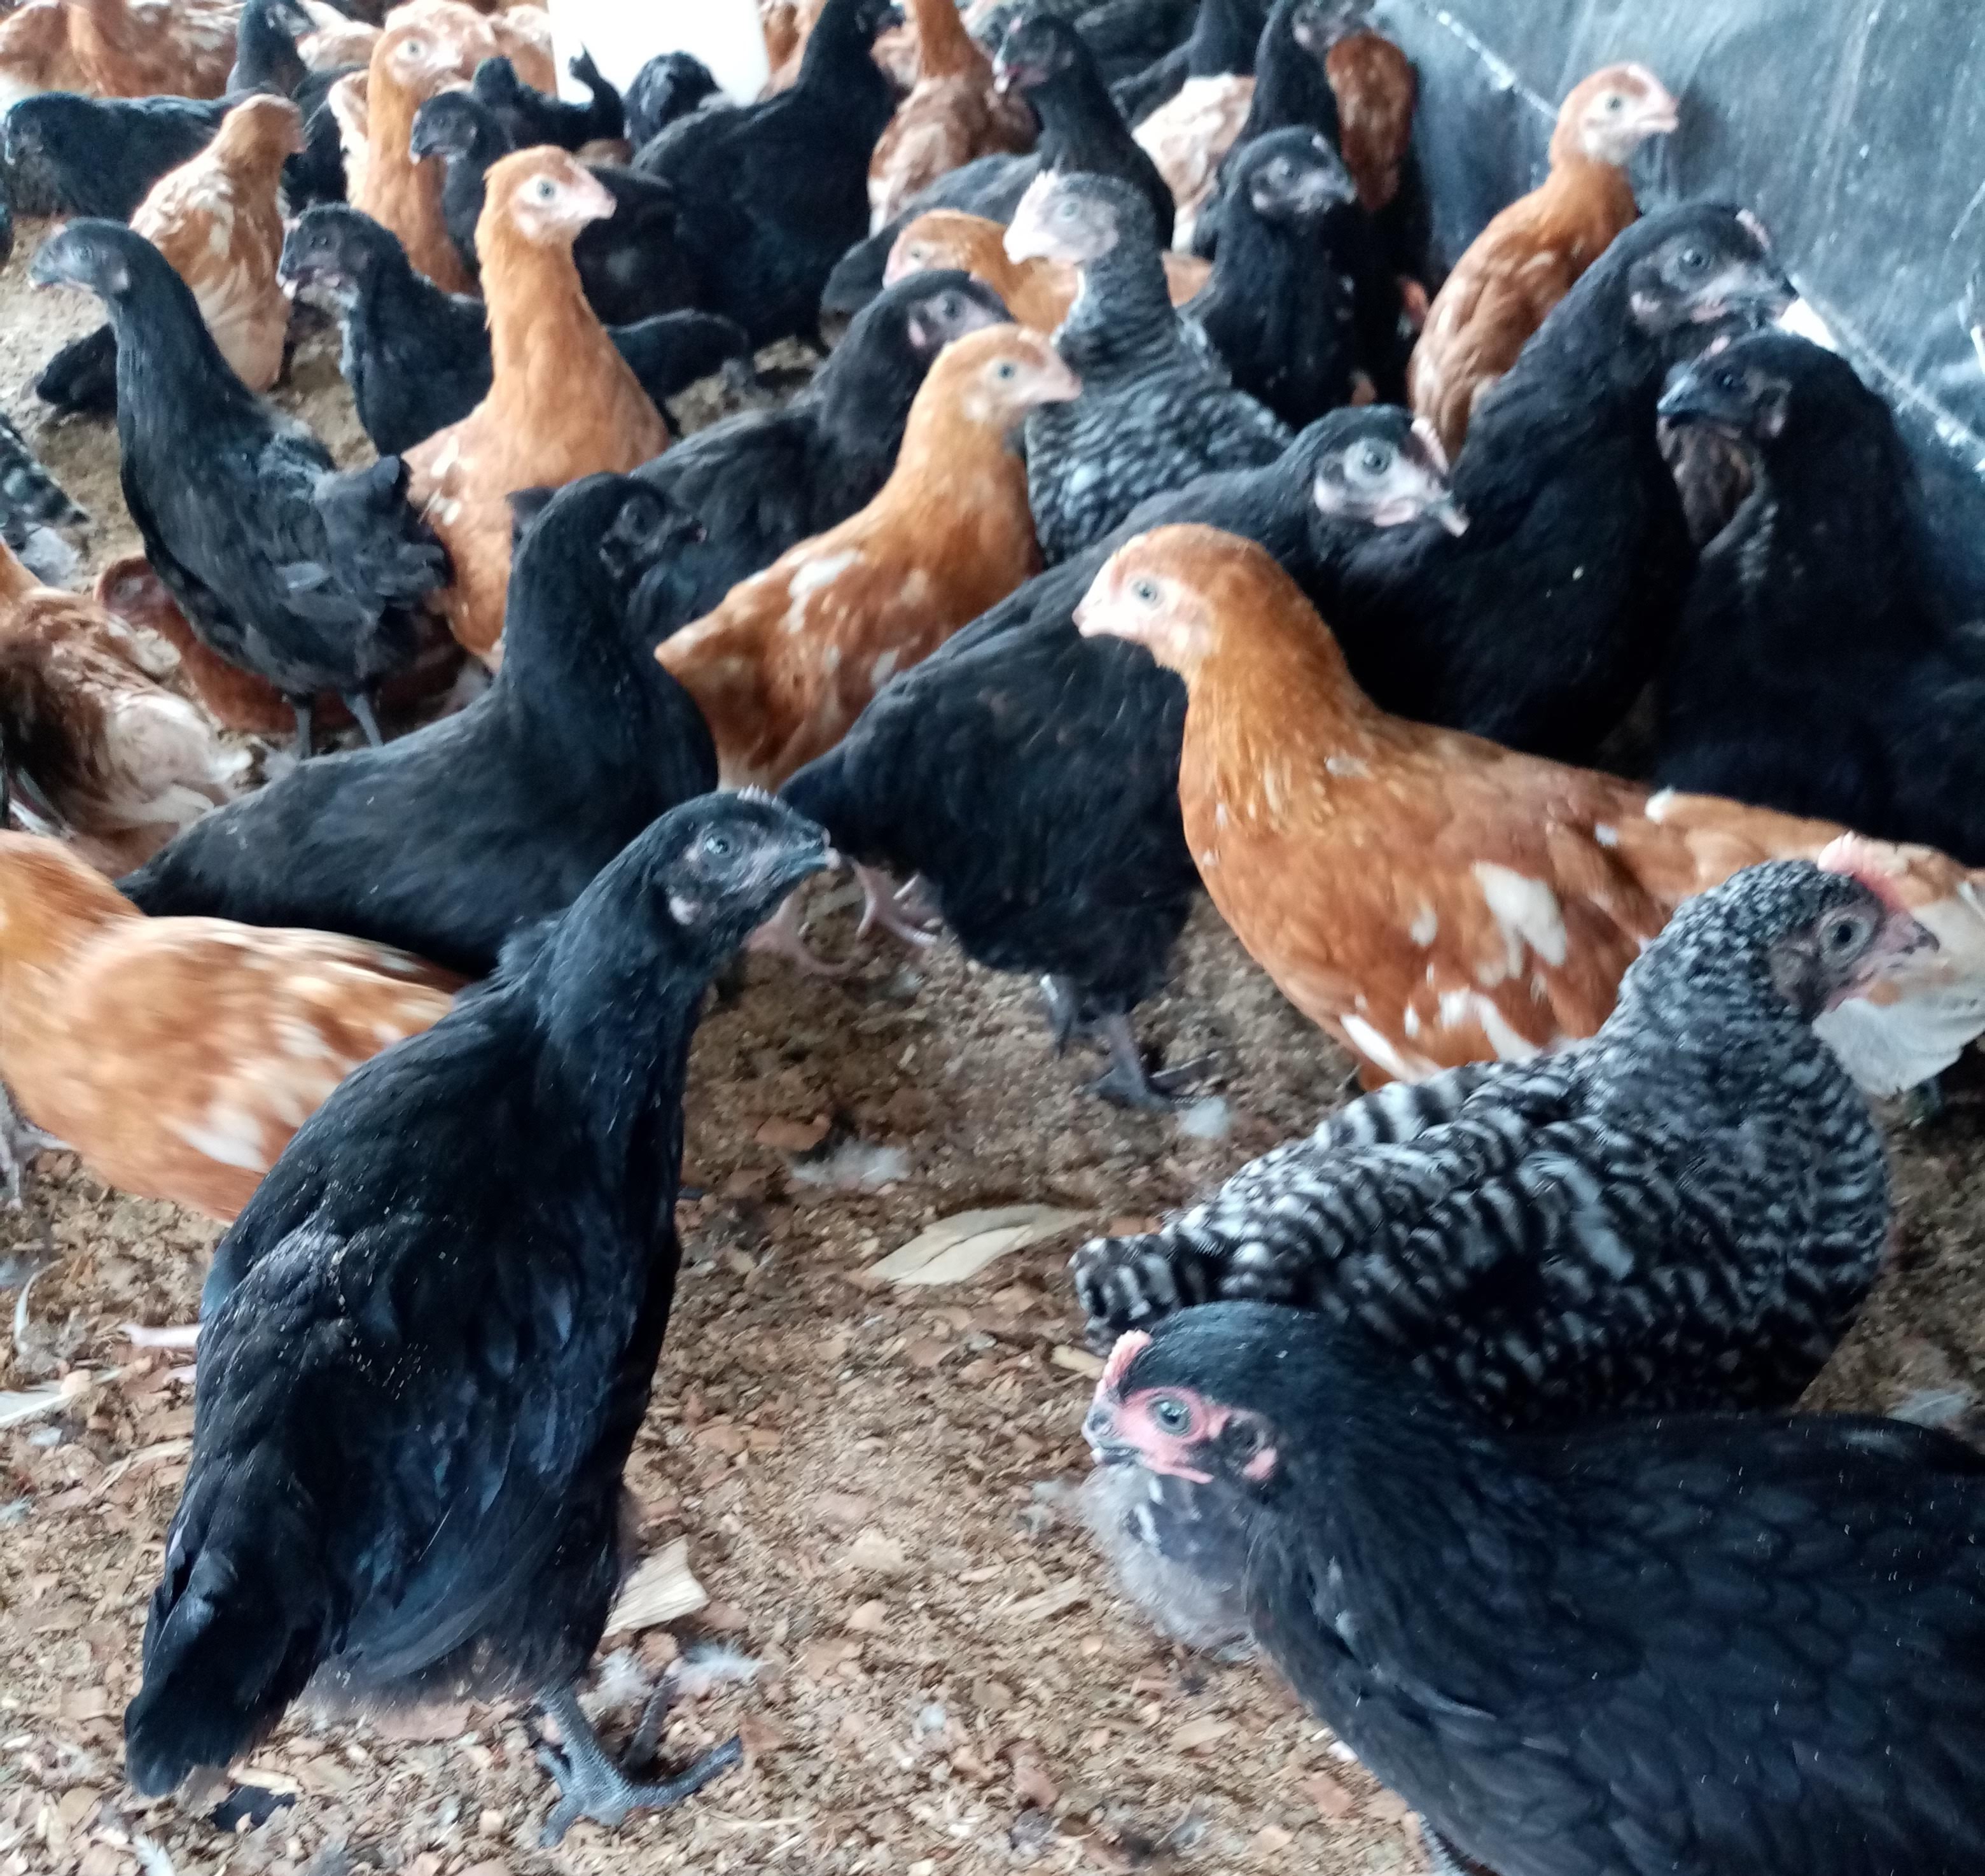 poultry farm for sale in florida